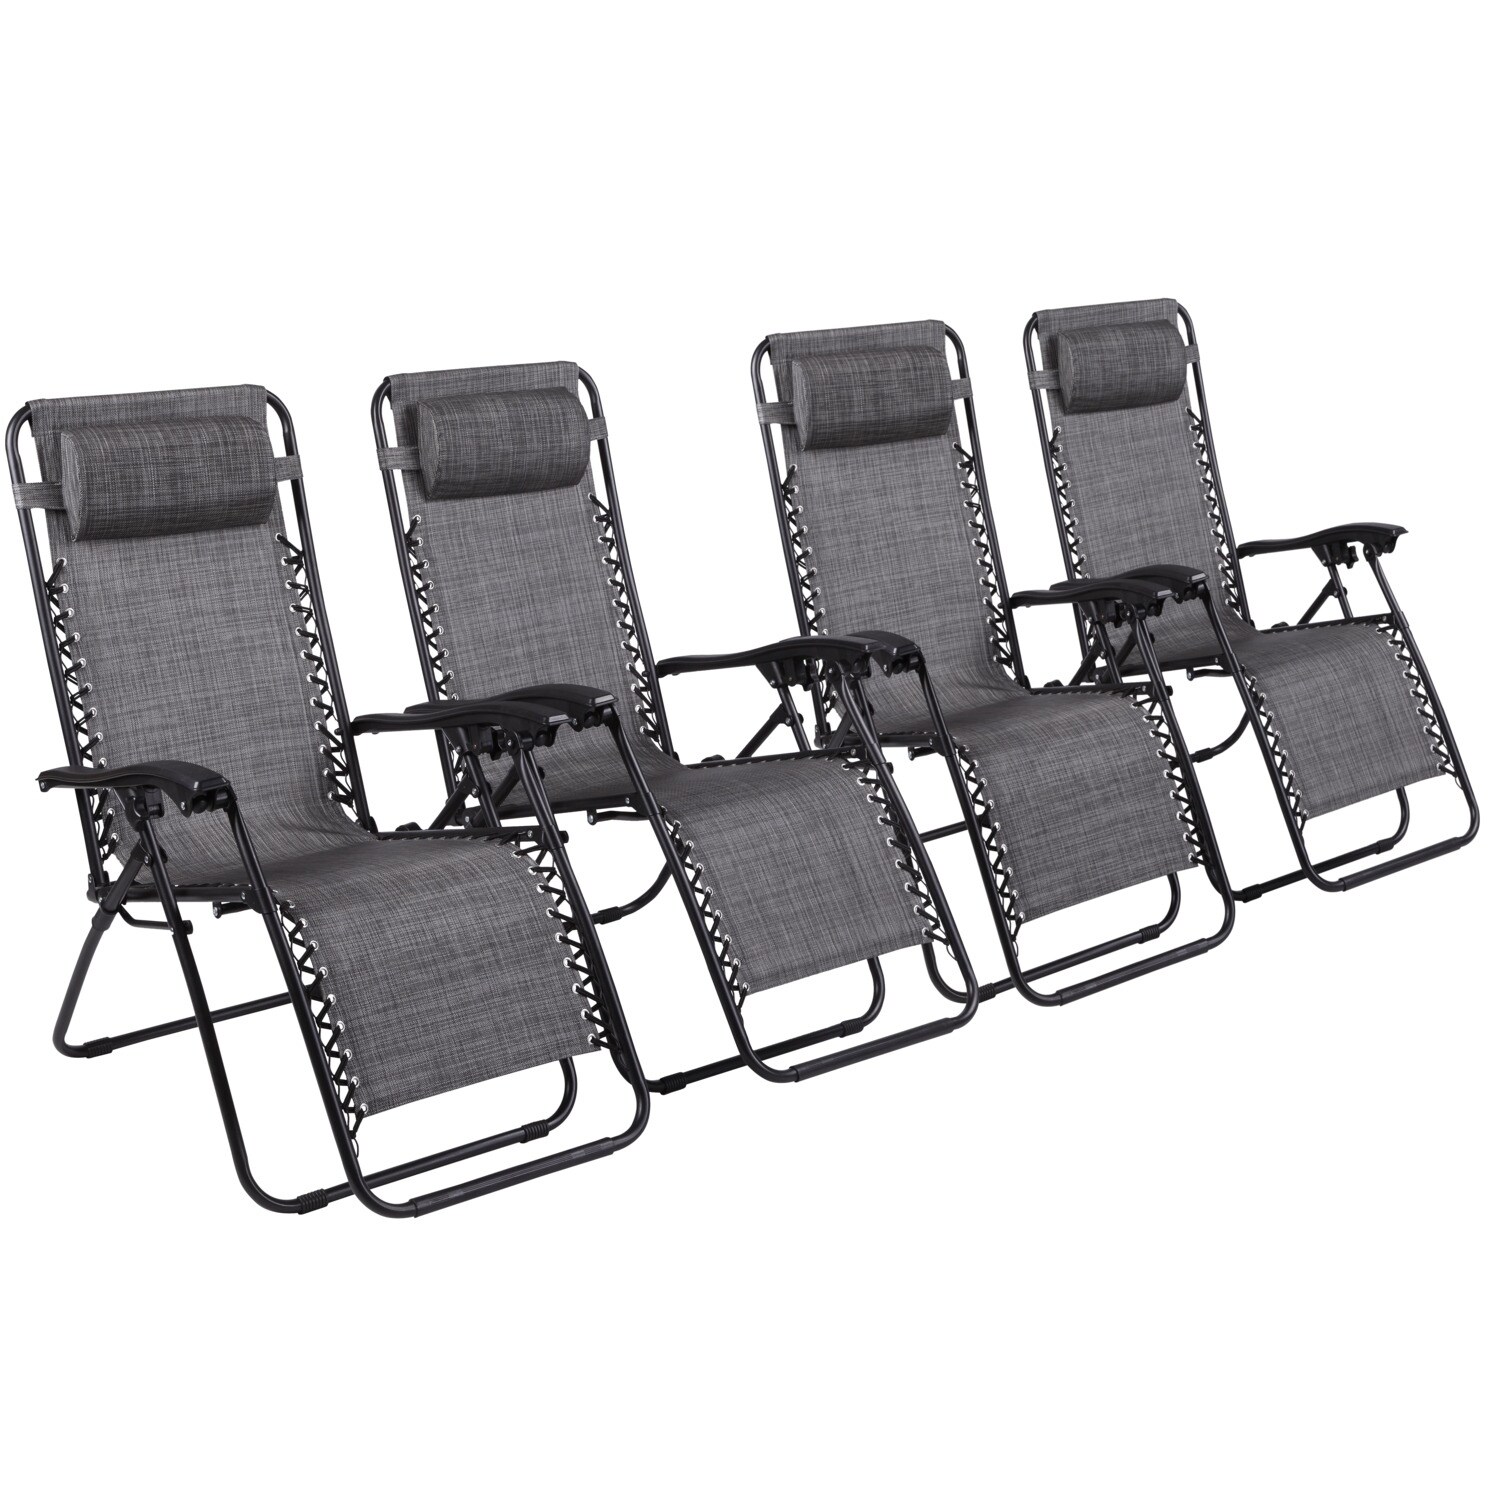 Zero Gravity Chairs Set of 4 Pool Lounge Chair Zero Gravity Recliner Zero Gravity Lounge Chair Antigravity Chairs with Headrest Grey - image 1 of 6